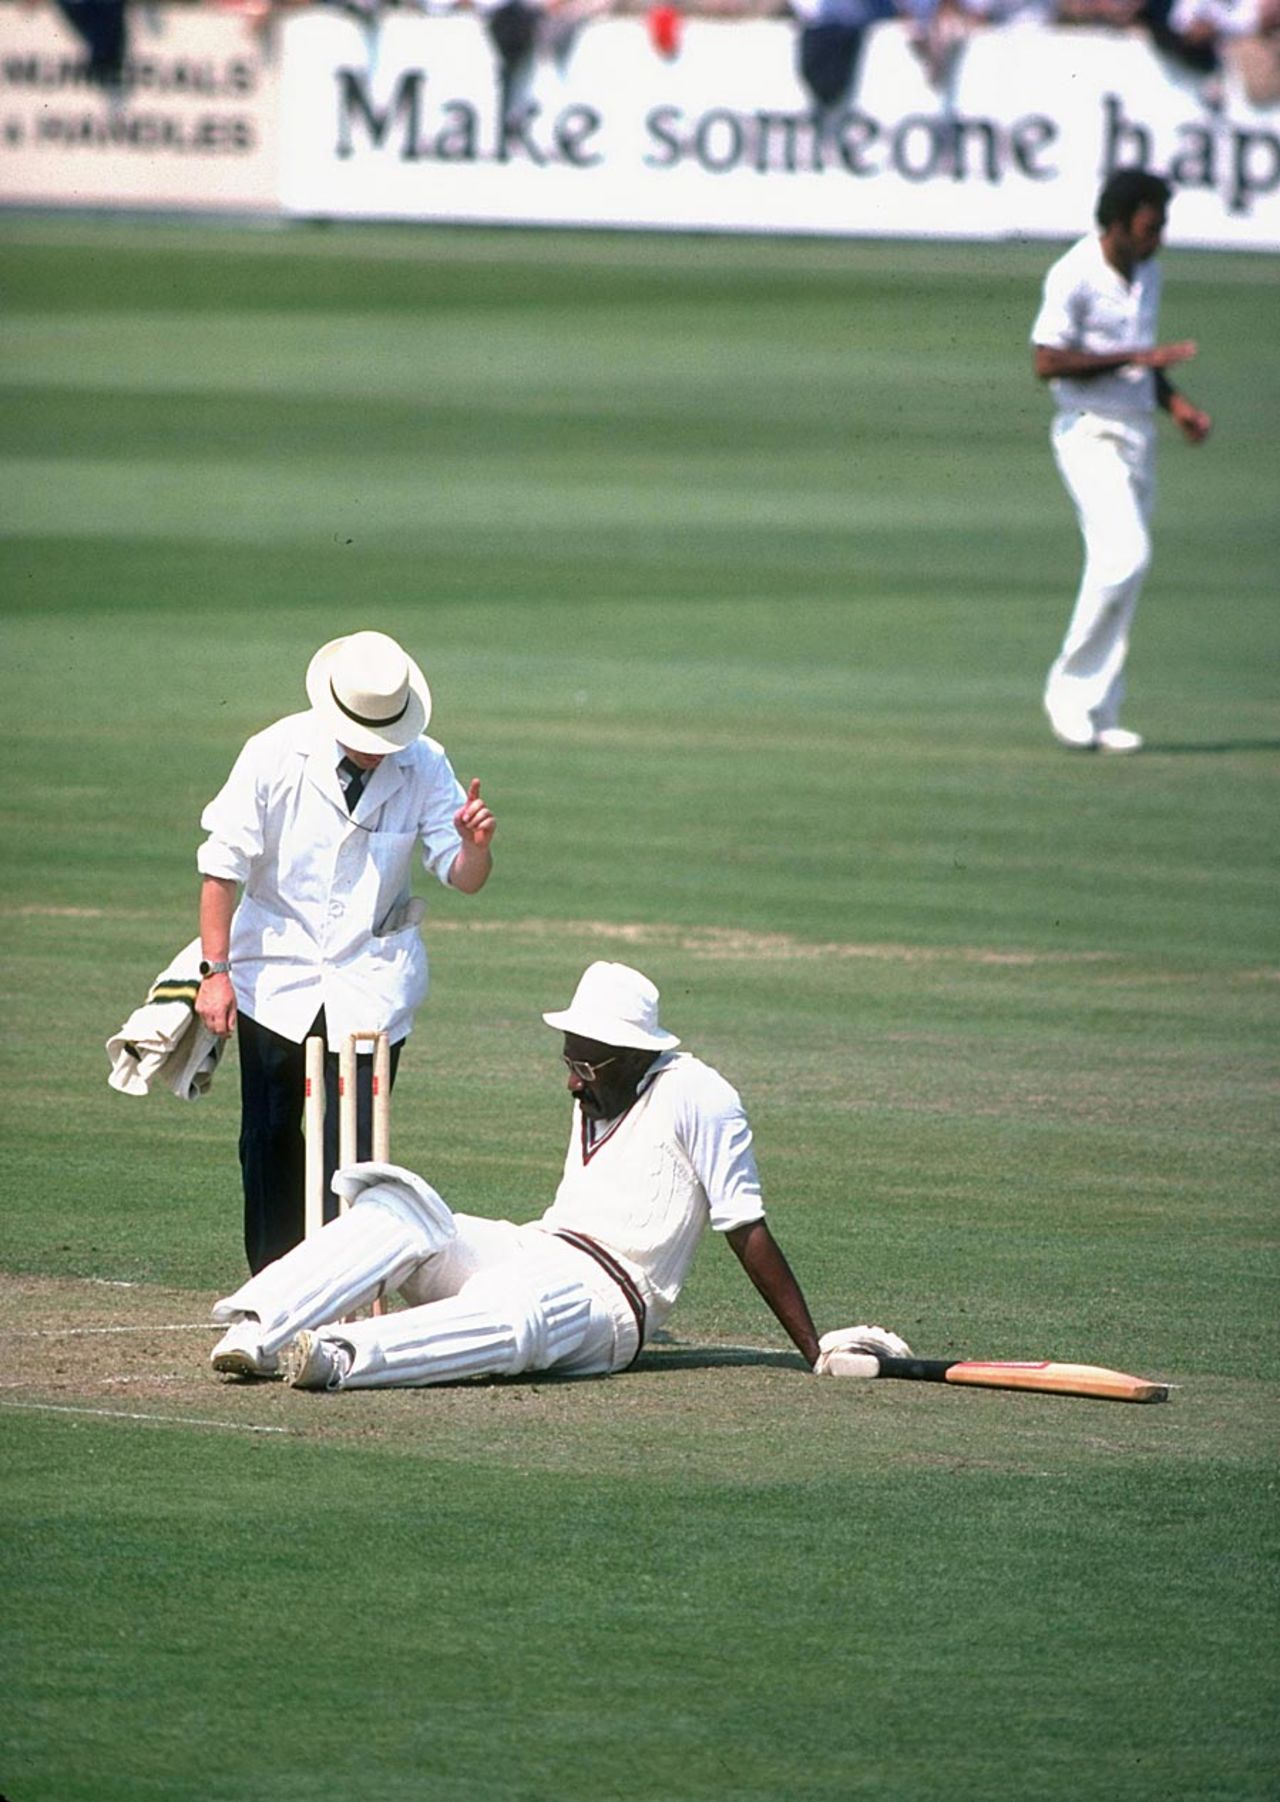 Clive Lloyd during the semi-final against Pakistan, West Indies v Pakistan, World Cup, 2nd semi-final, June 20, 1979